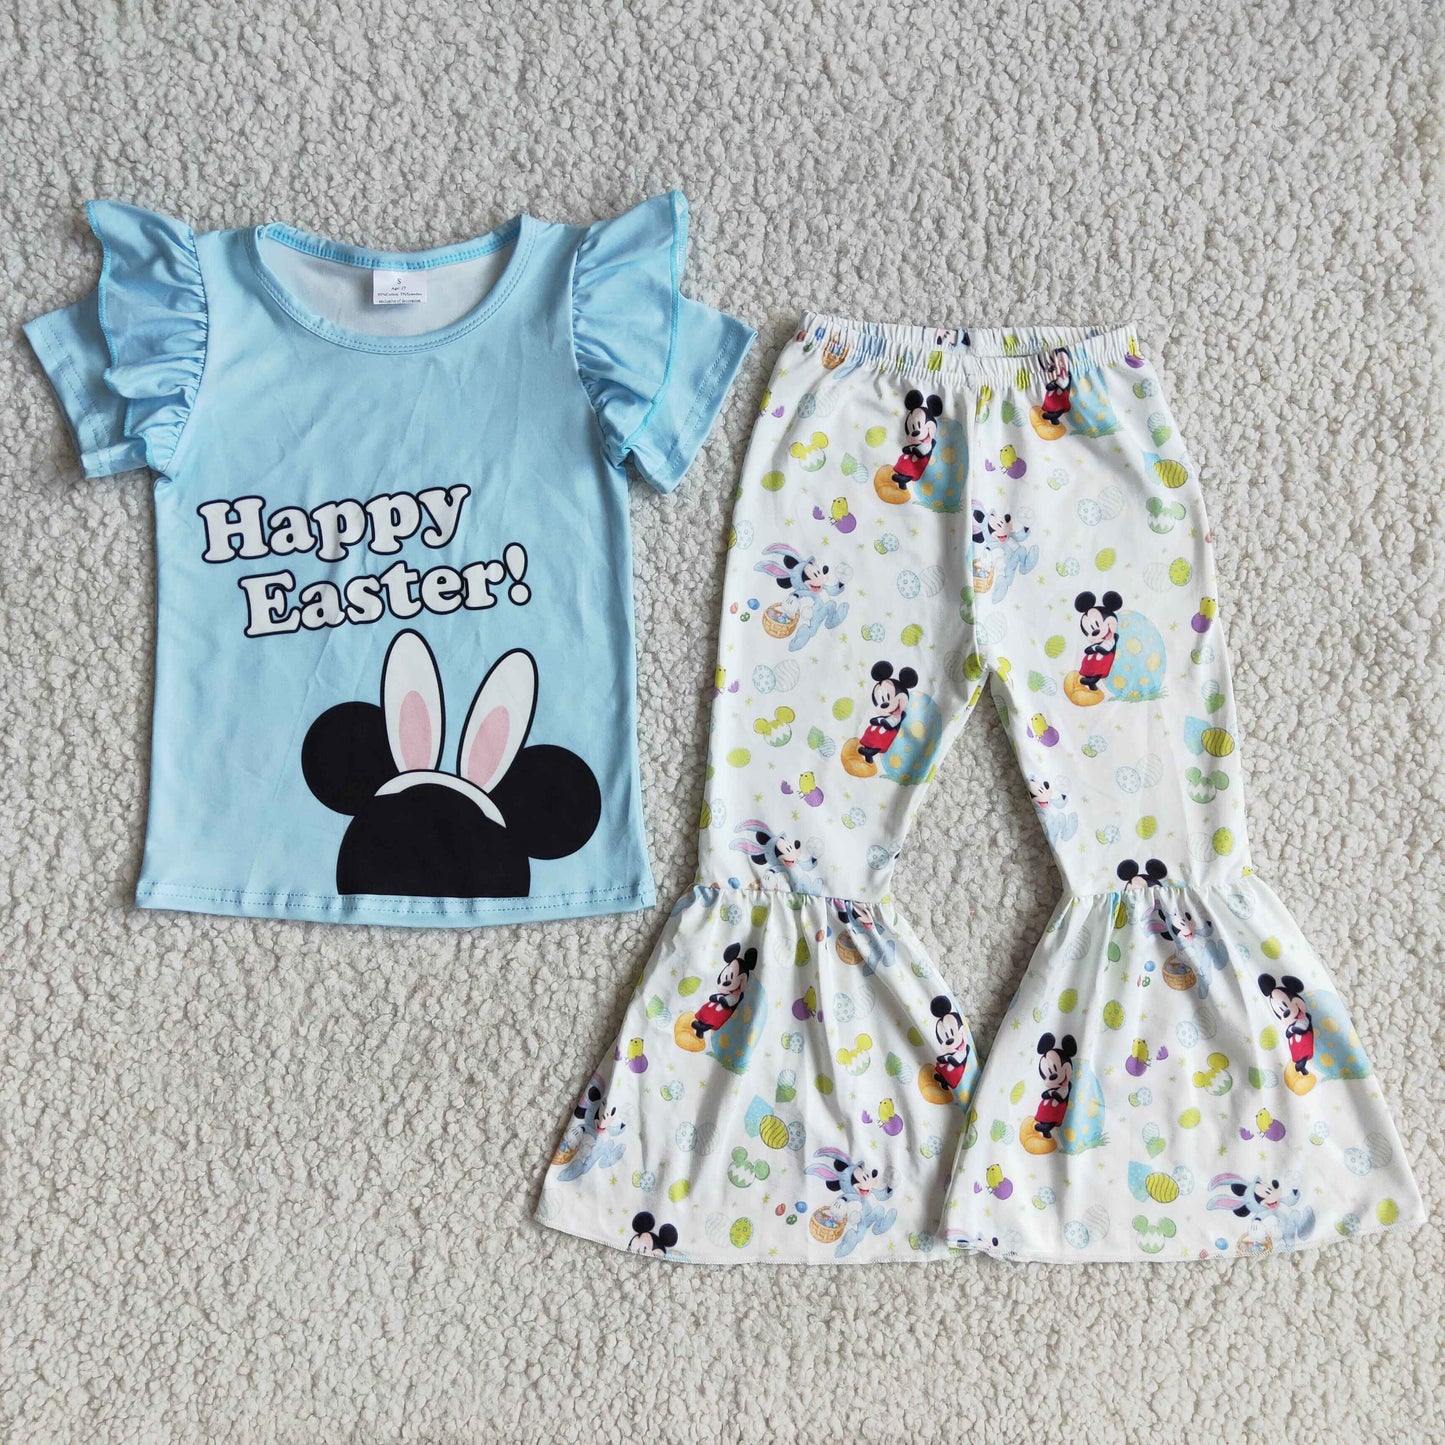 New Happy Easter outfit